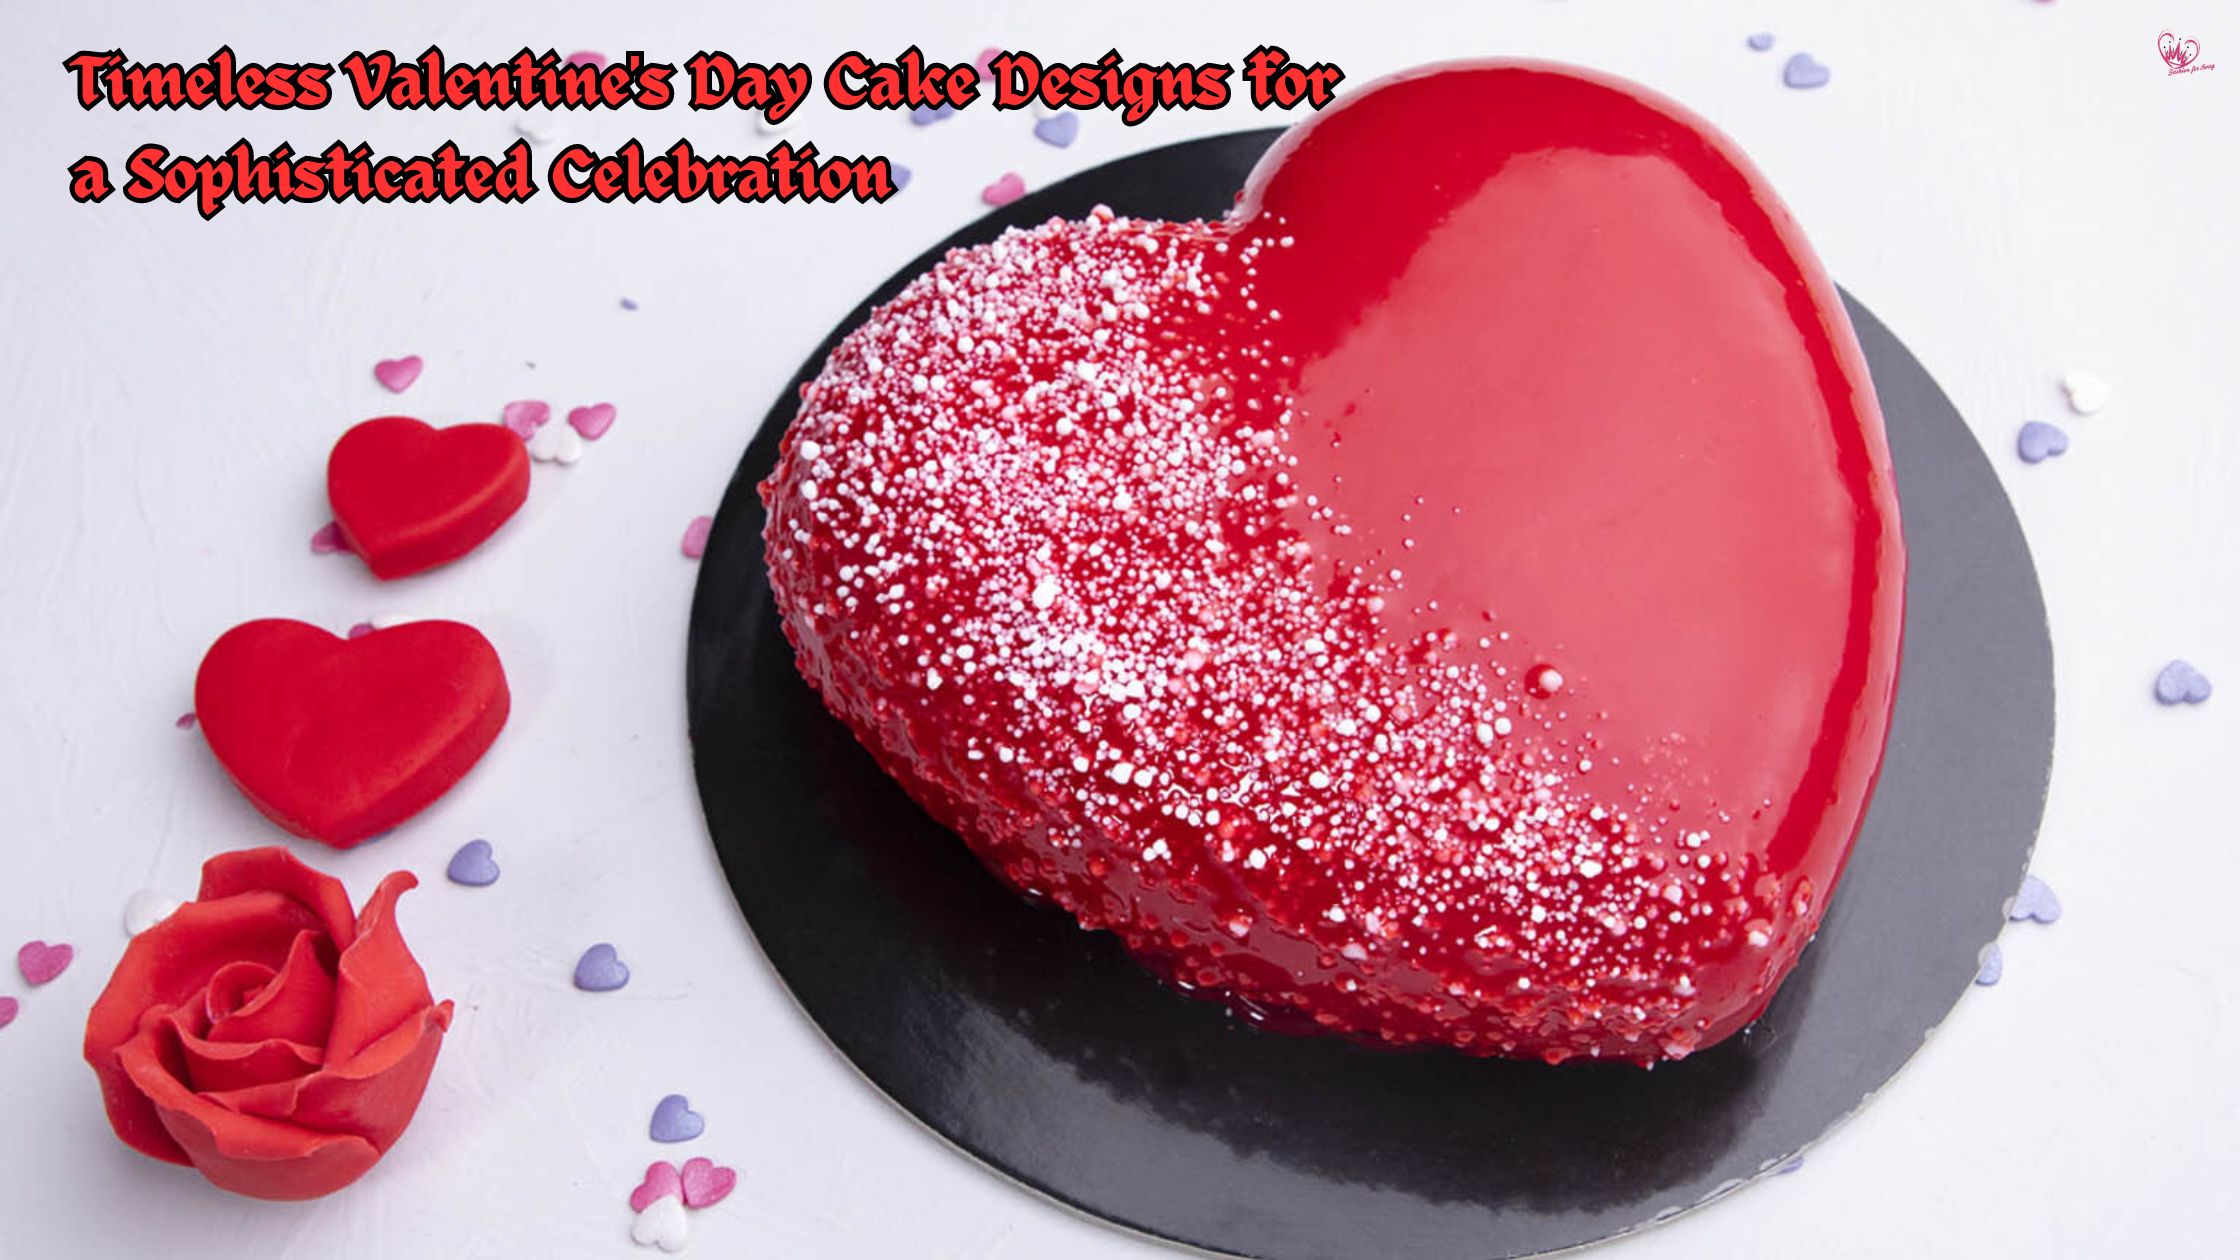 Classic Elegance: Timeless Valentine’s Day Cake Designs for a Sophisticated Celebration